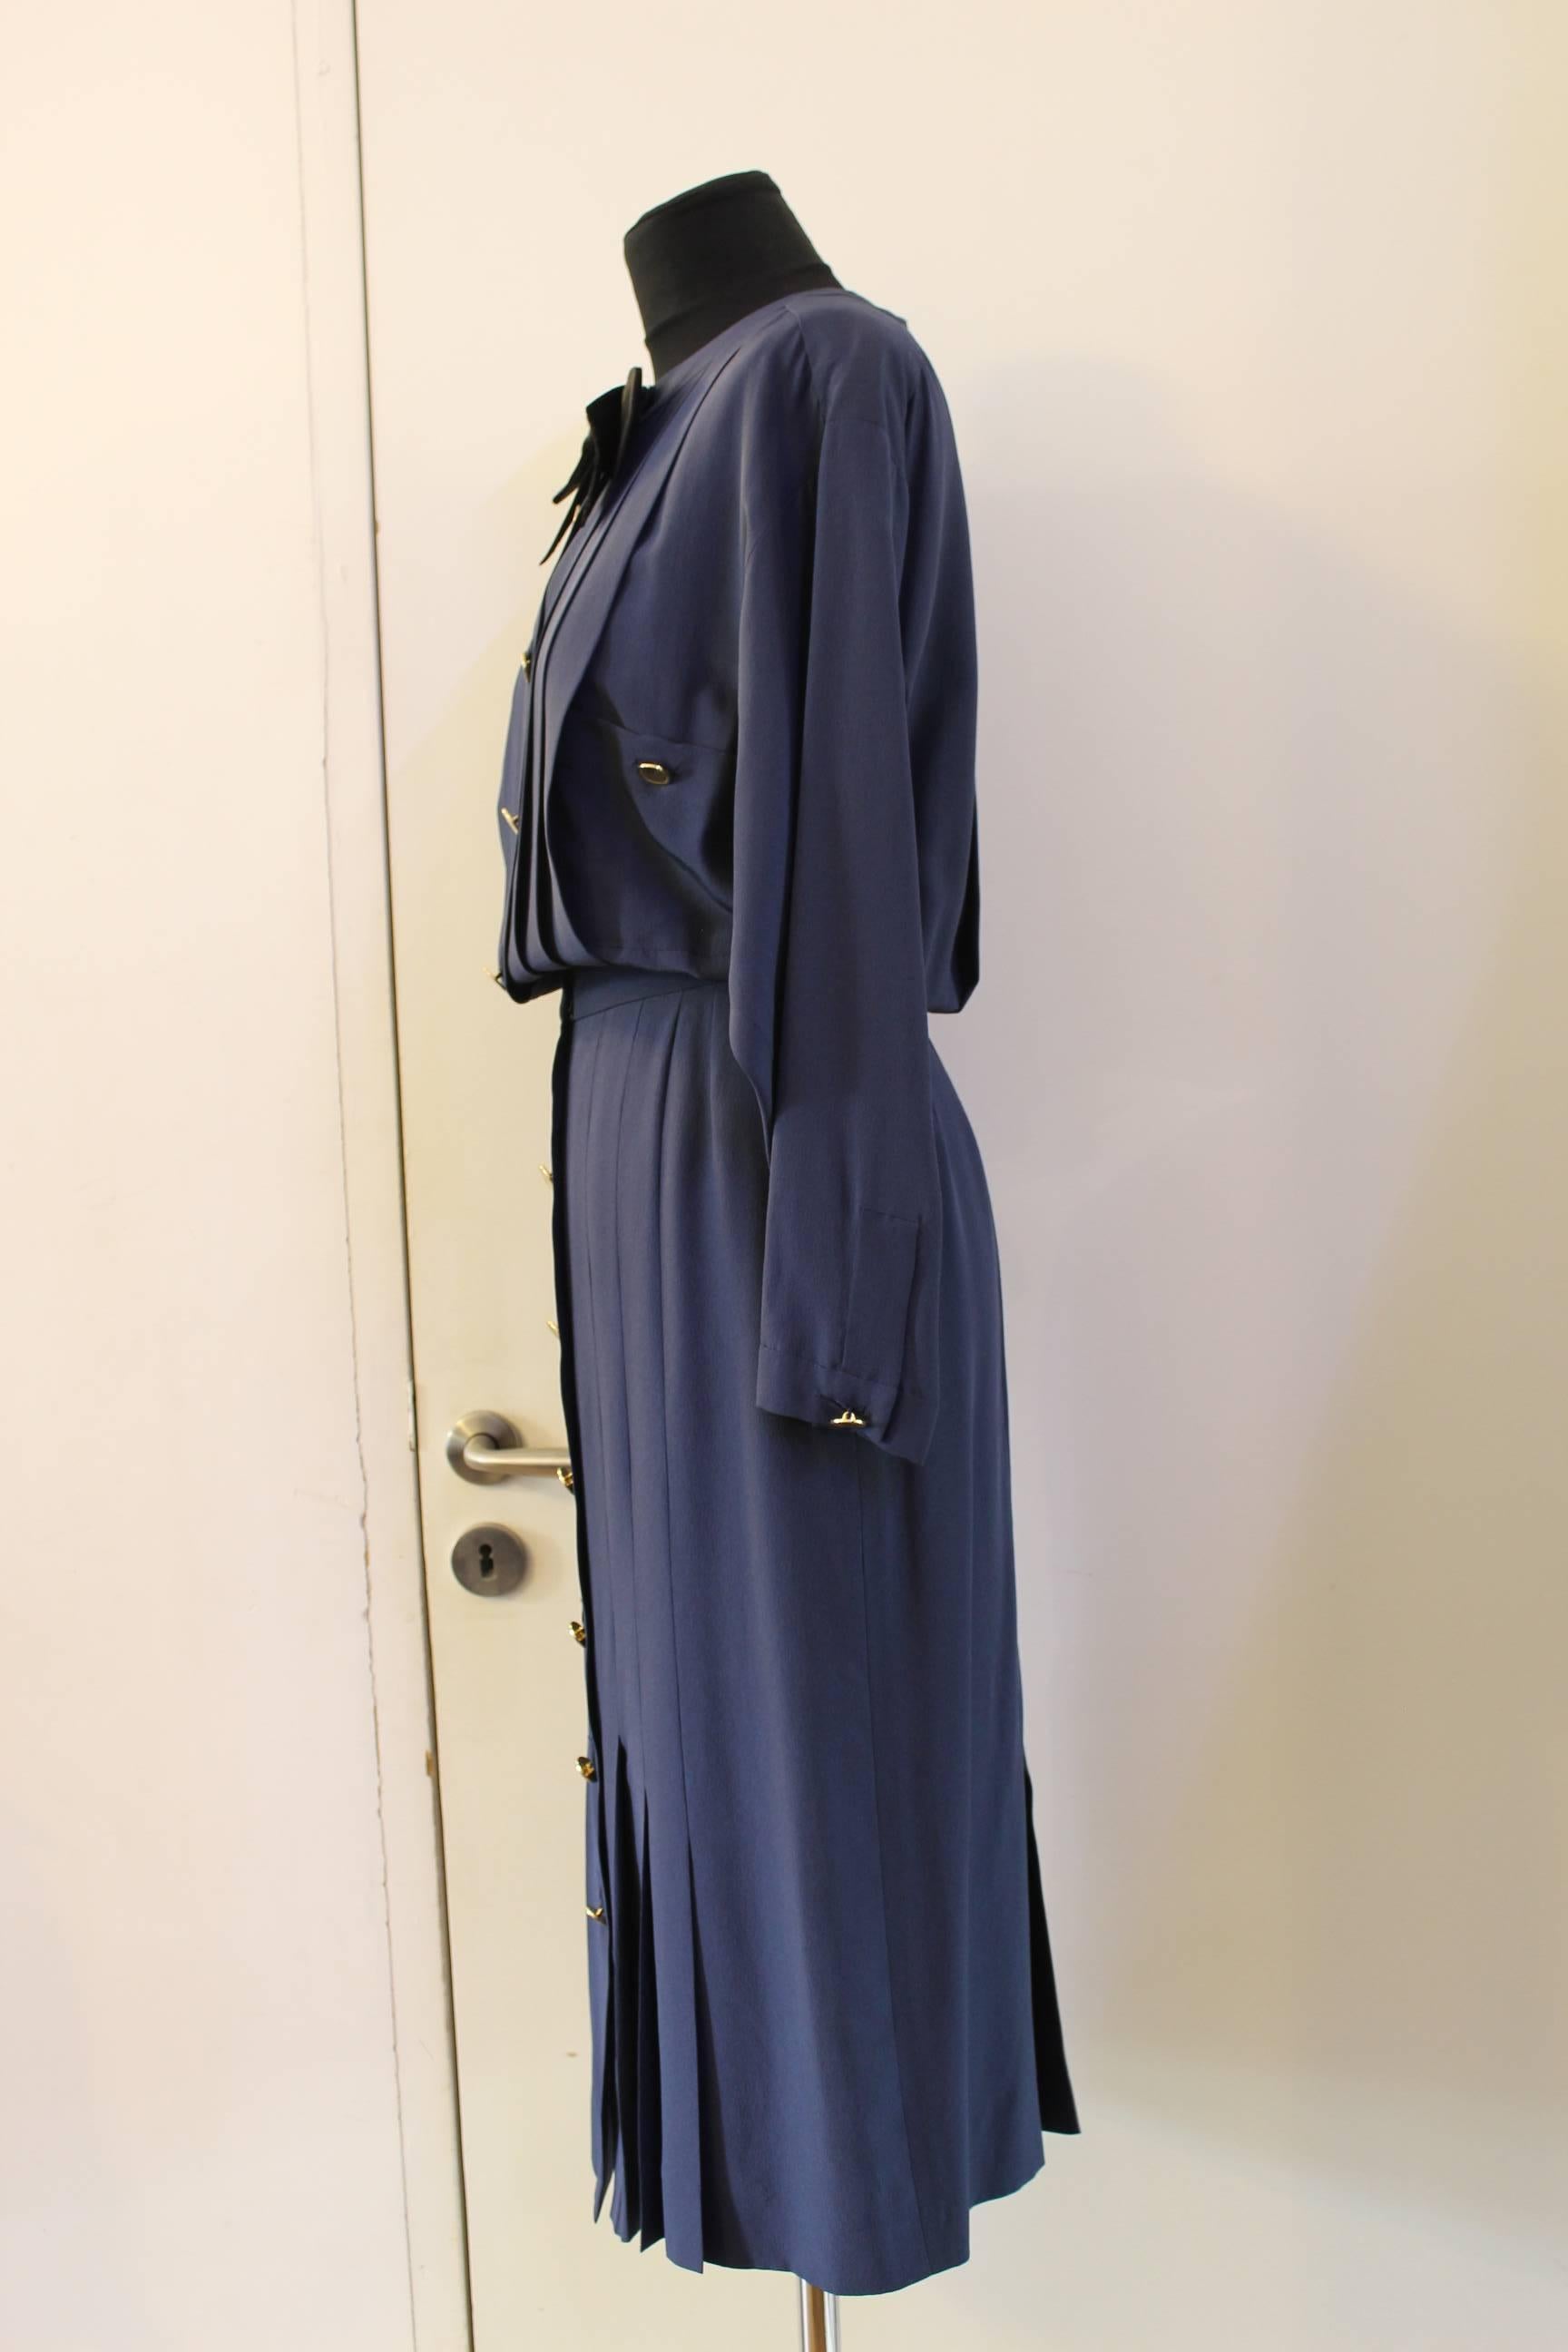 Gorgeous Chanel dress in blue dark silk and gold bouttons.

Excellent condition

Size 38 (see label)

Really good condition, no damage.